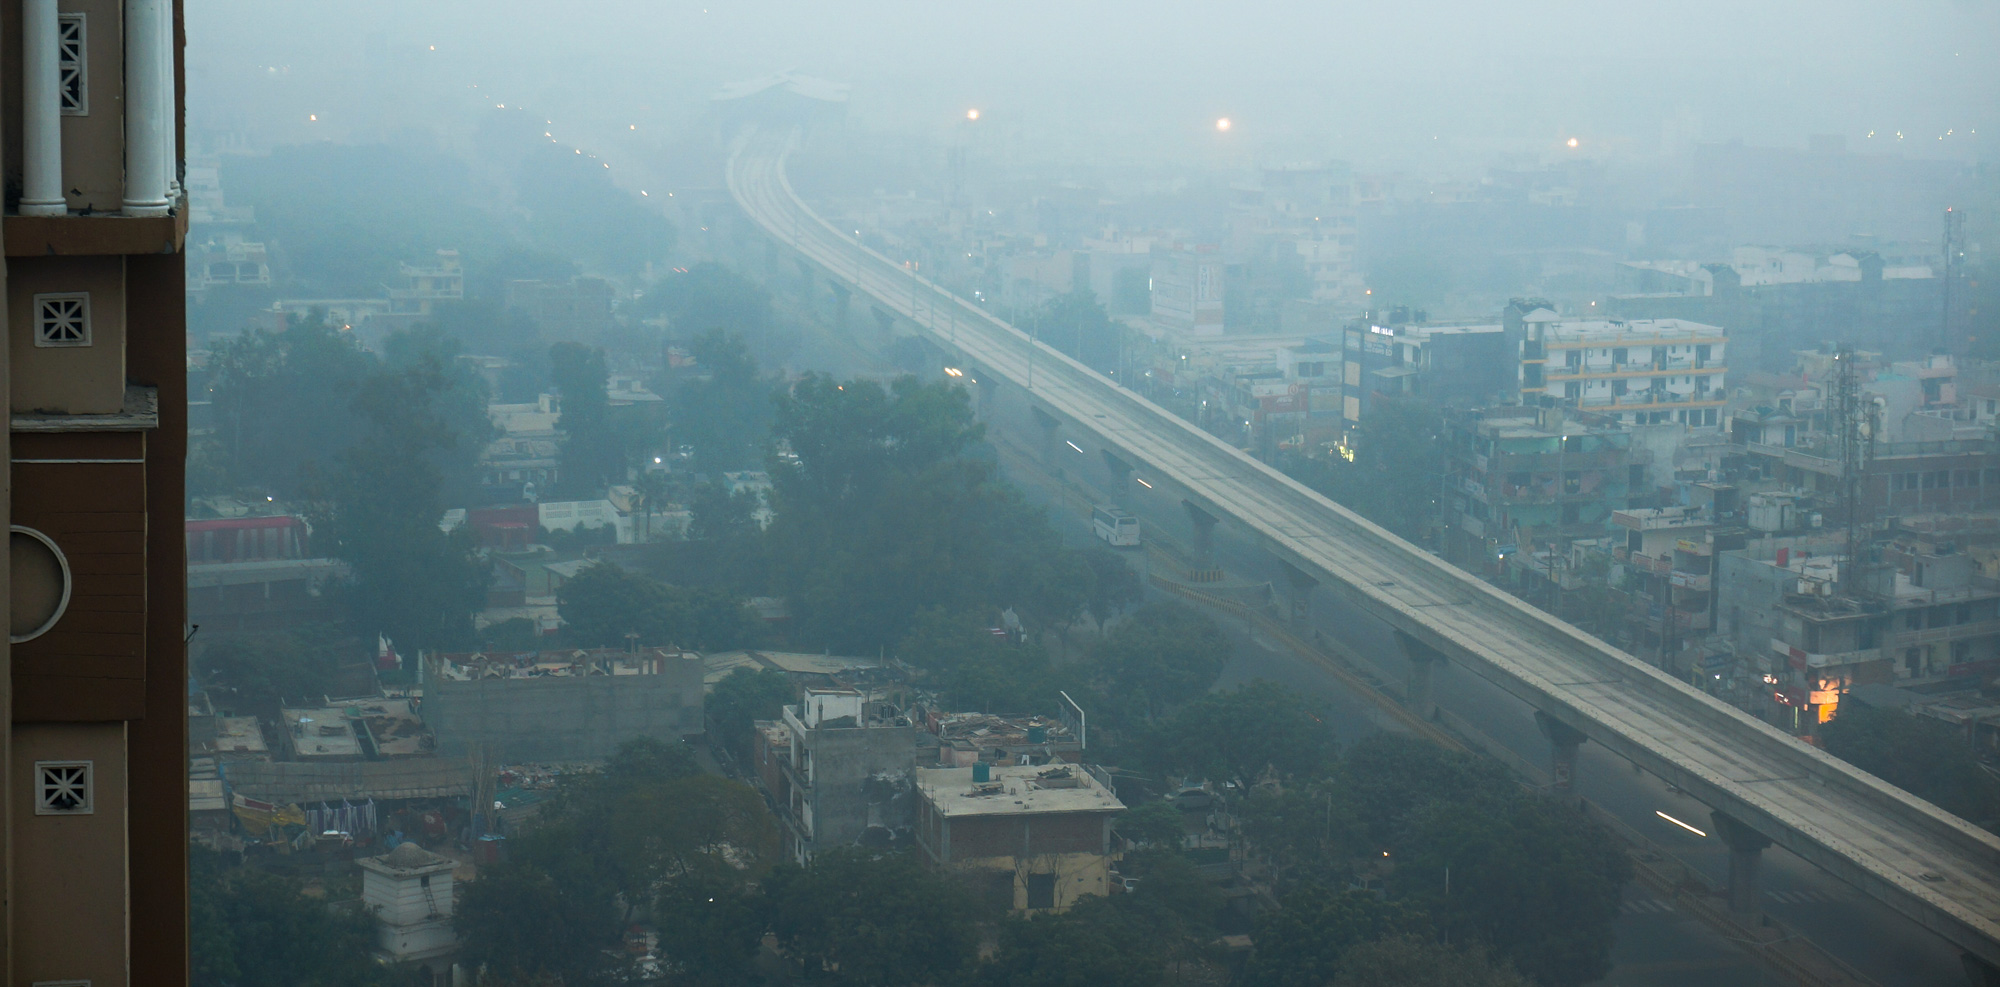 The World Bank is ready to help the Bengal government tackle air pollution in Calcutta.